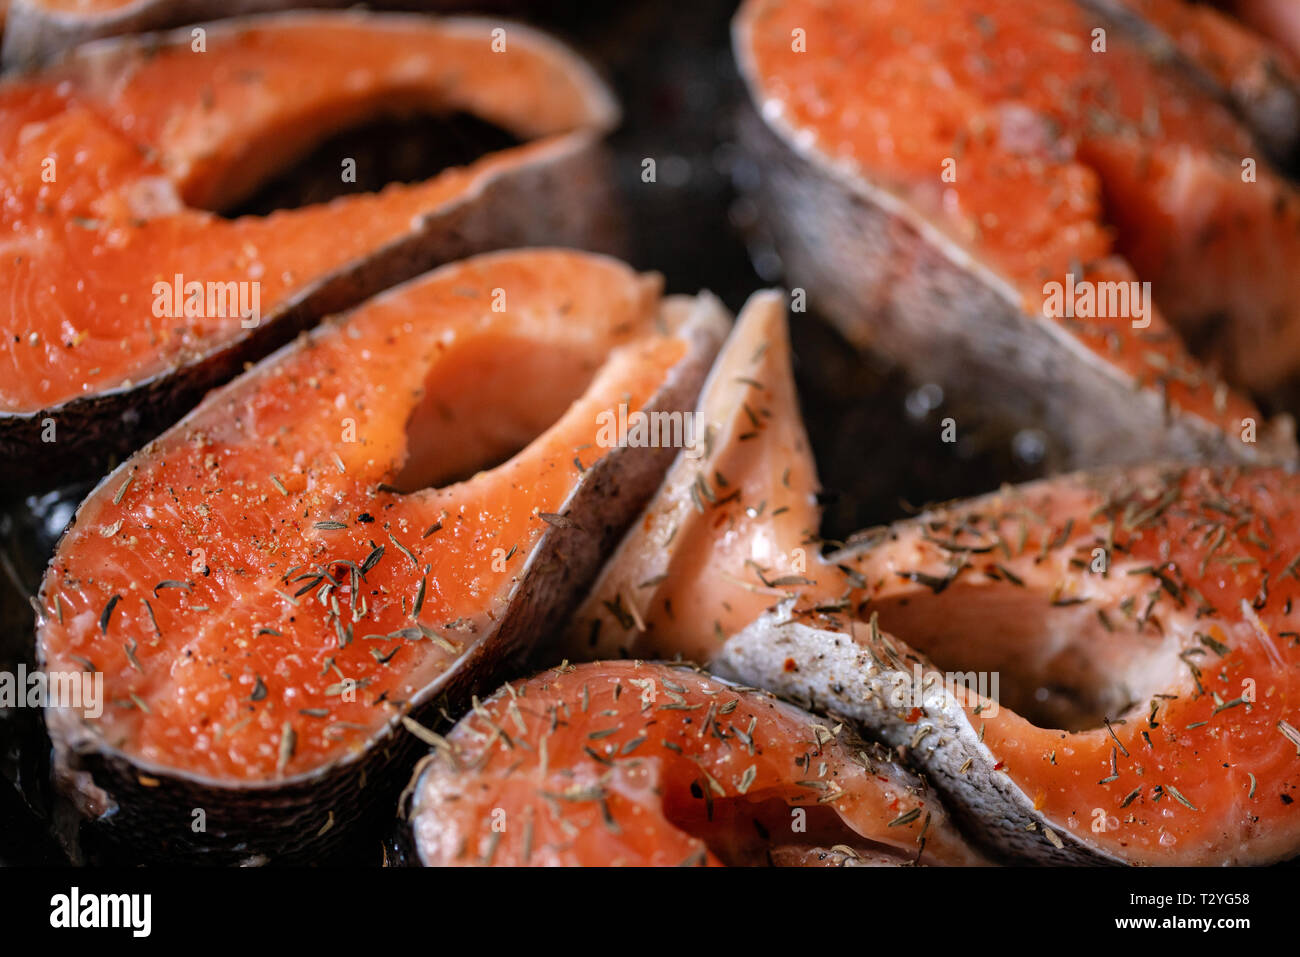 https://c8.alamy.com/comp/T2YG58/close-up-of-raw-pink-salmon-steaks-in-a-frying-pan-top-view-fresh-trout-for-frying-T2YG58.jpg